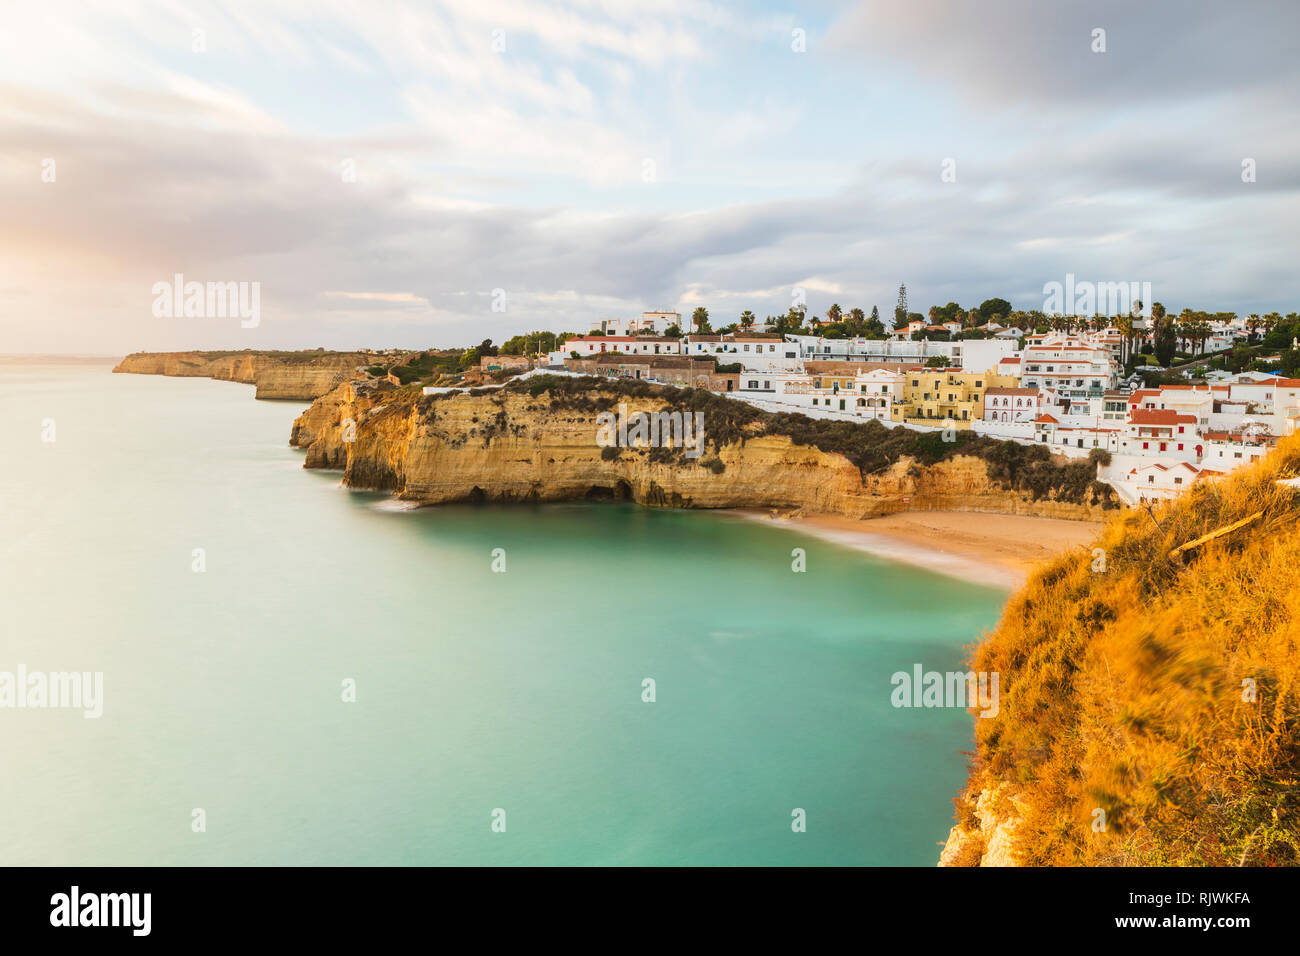 High level view of cliffs and village, Carvoeiro, Algarve, Portugal, Europe Stock Photo